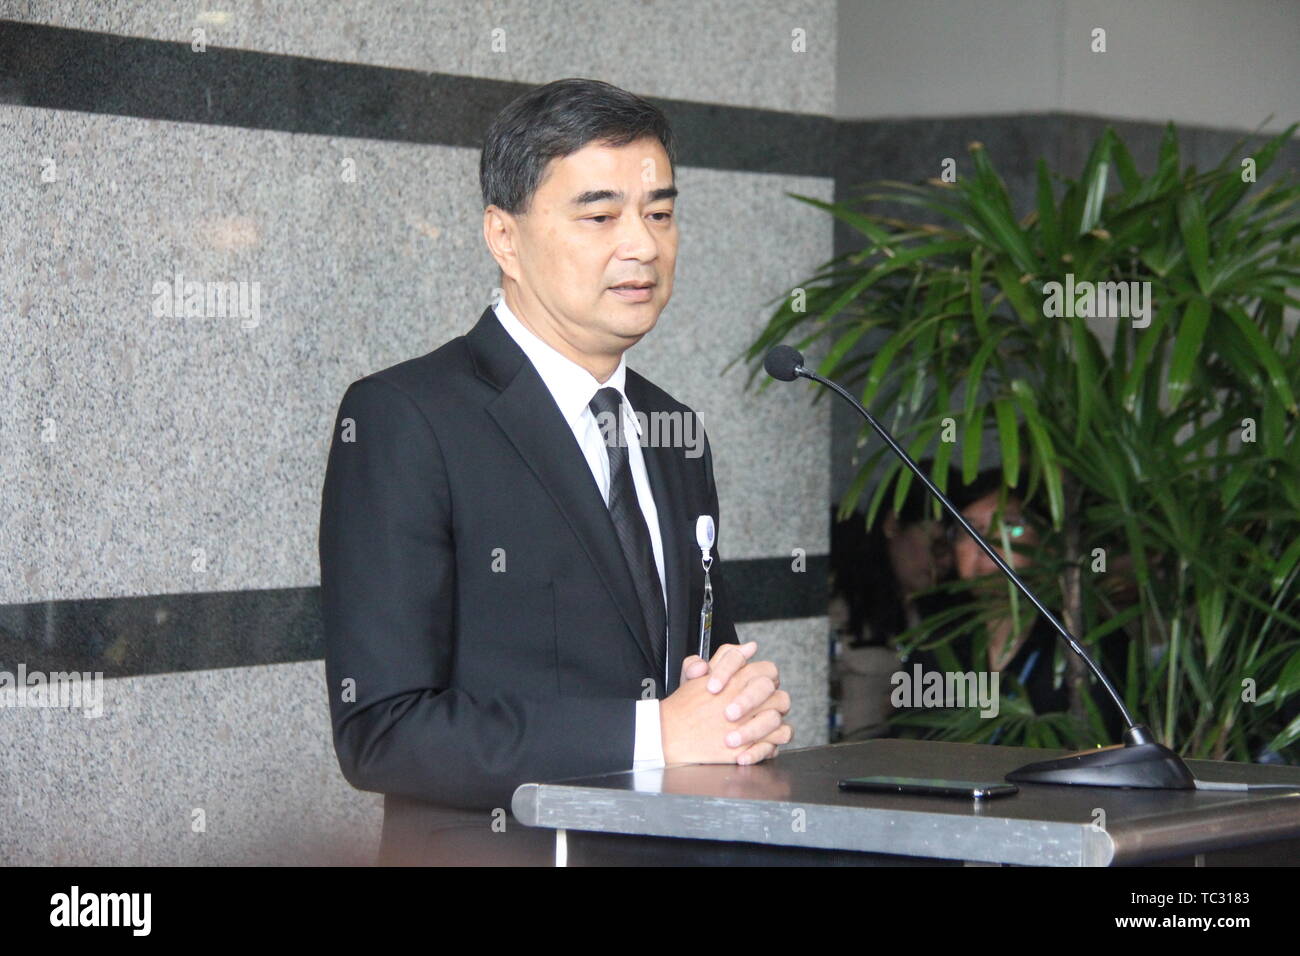 (190605) -- BANGKOK, June 5, 2019 (Xinhua) -- Thailand's former prime minister, former Democrat Party leader Abhisit Vejjajiva speaks at the TOT Public Company Limited's head office in northern Bangkok, Thailand, on June 5, 2019. Abhisit annouced his resignation as MP, before voting for the new prime minister of Thailand on Wednesday. He apologized to all the people who had voted for his party and candidates in the nationwide election for the failure to put his pledged standpoint to work. A joint House of Representatives and Senate meeting is going on Wednesday during which 500 lower house rep Stock Photo